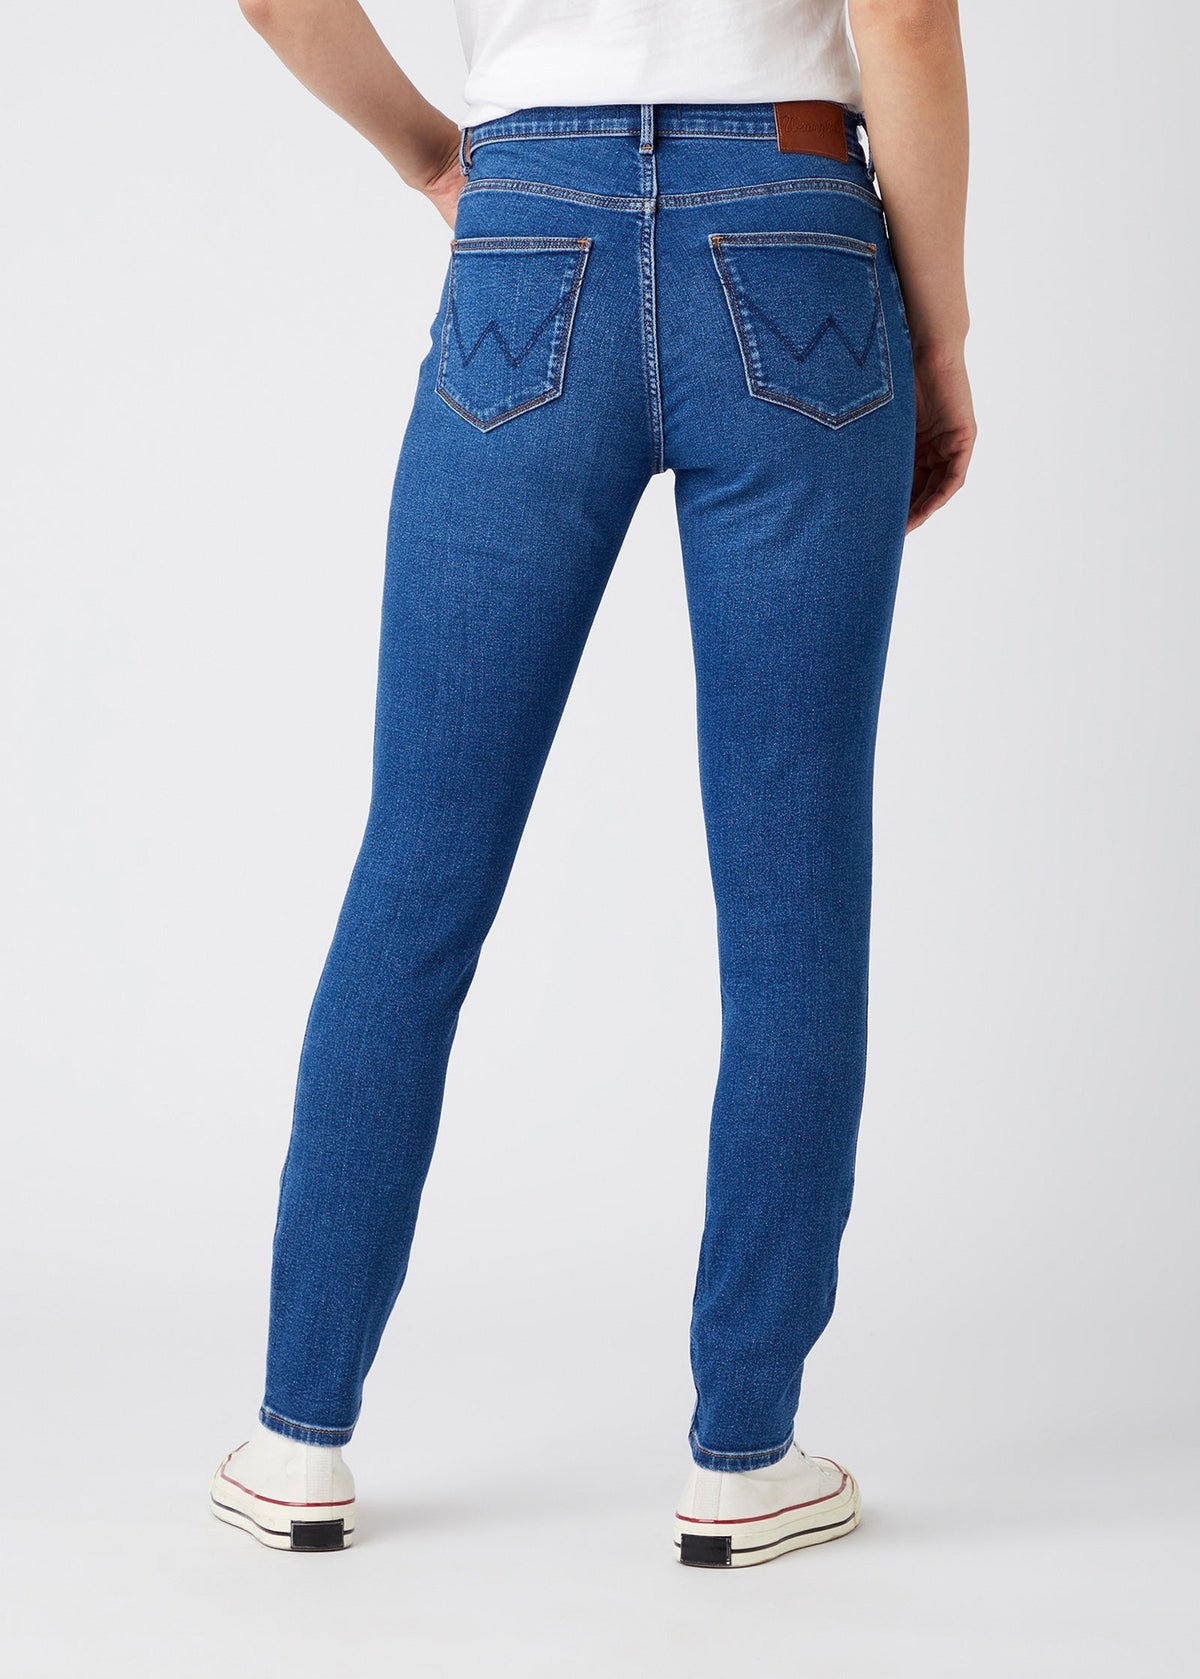 High Rise Skinny Jeans in Camellia